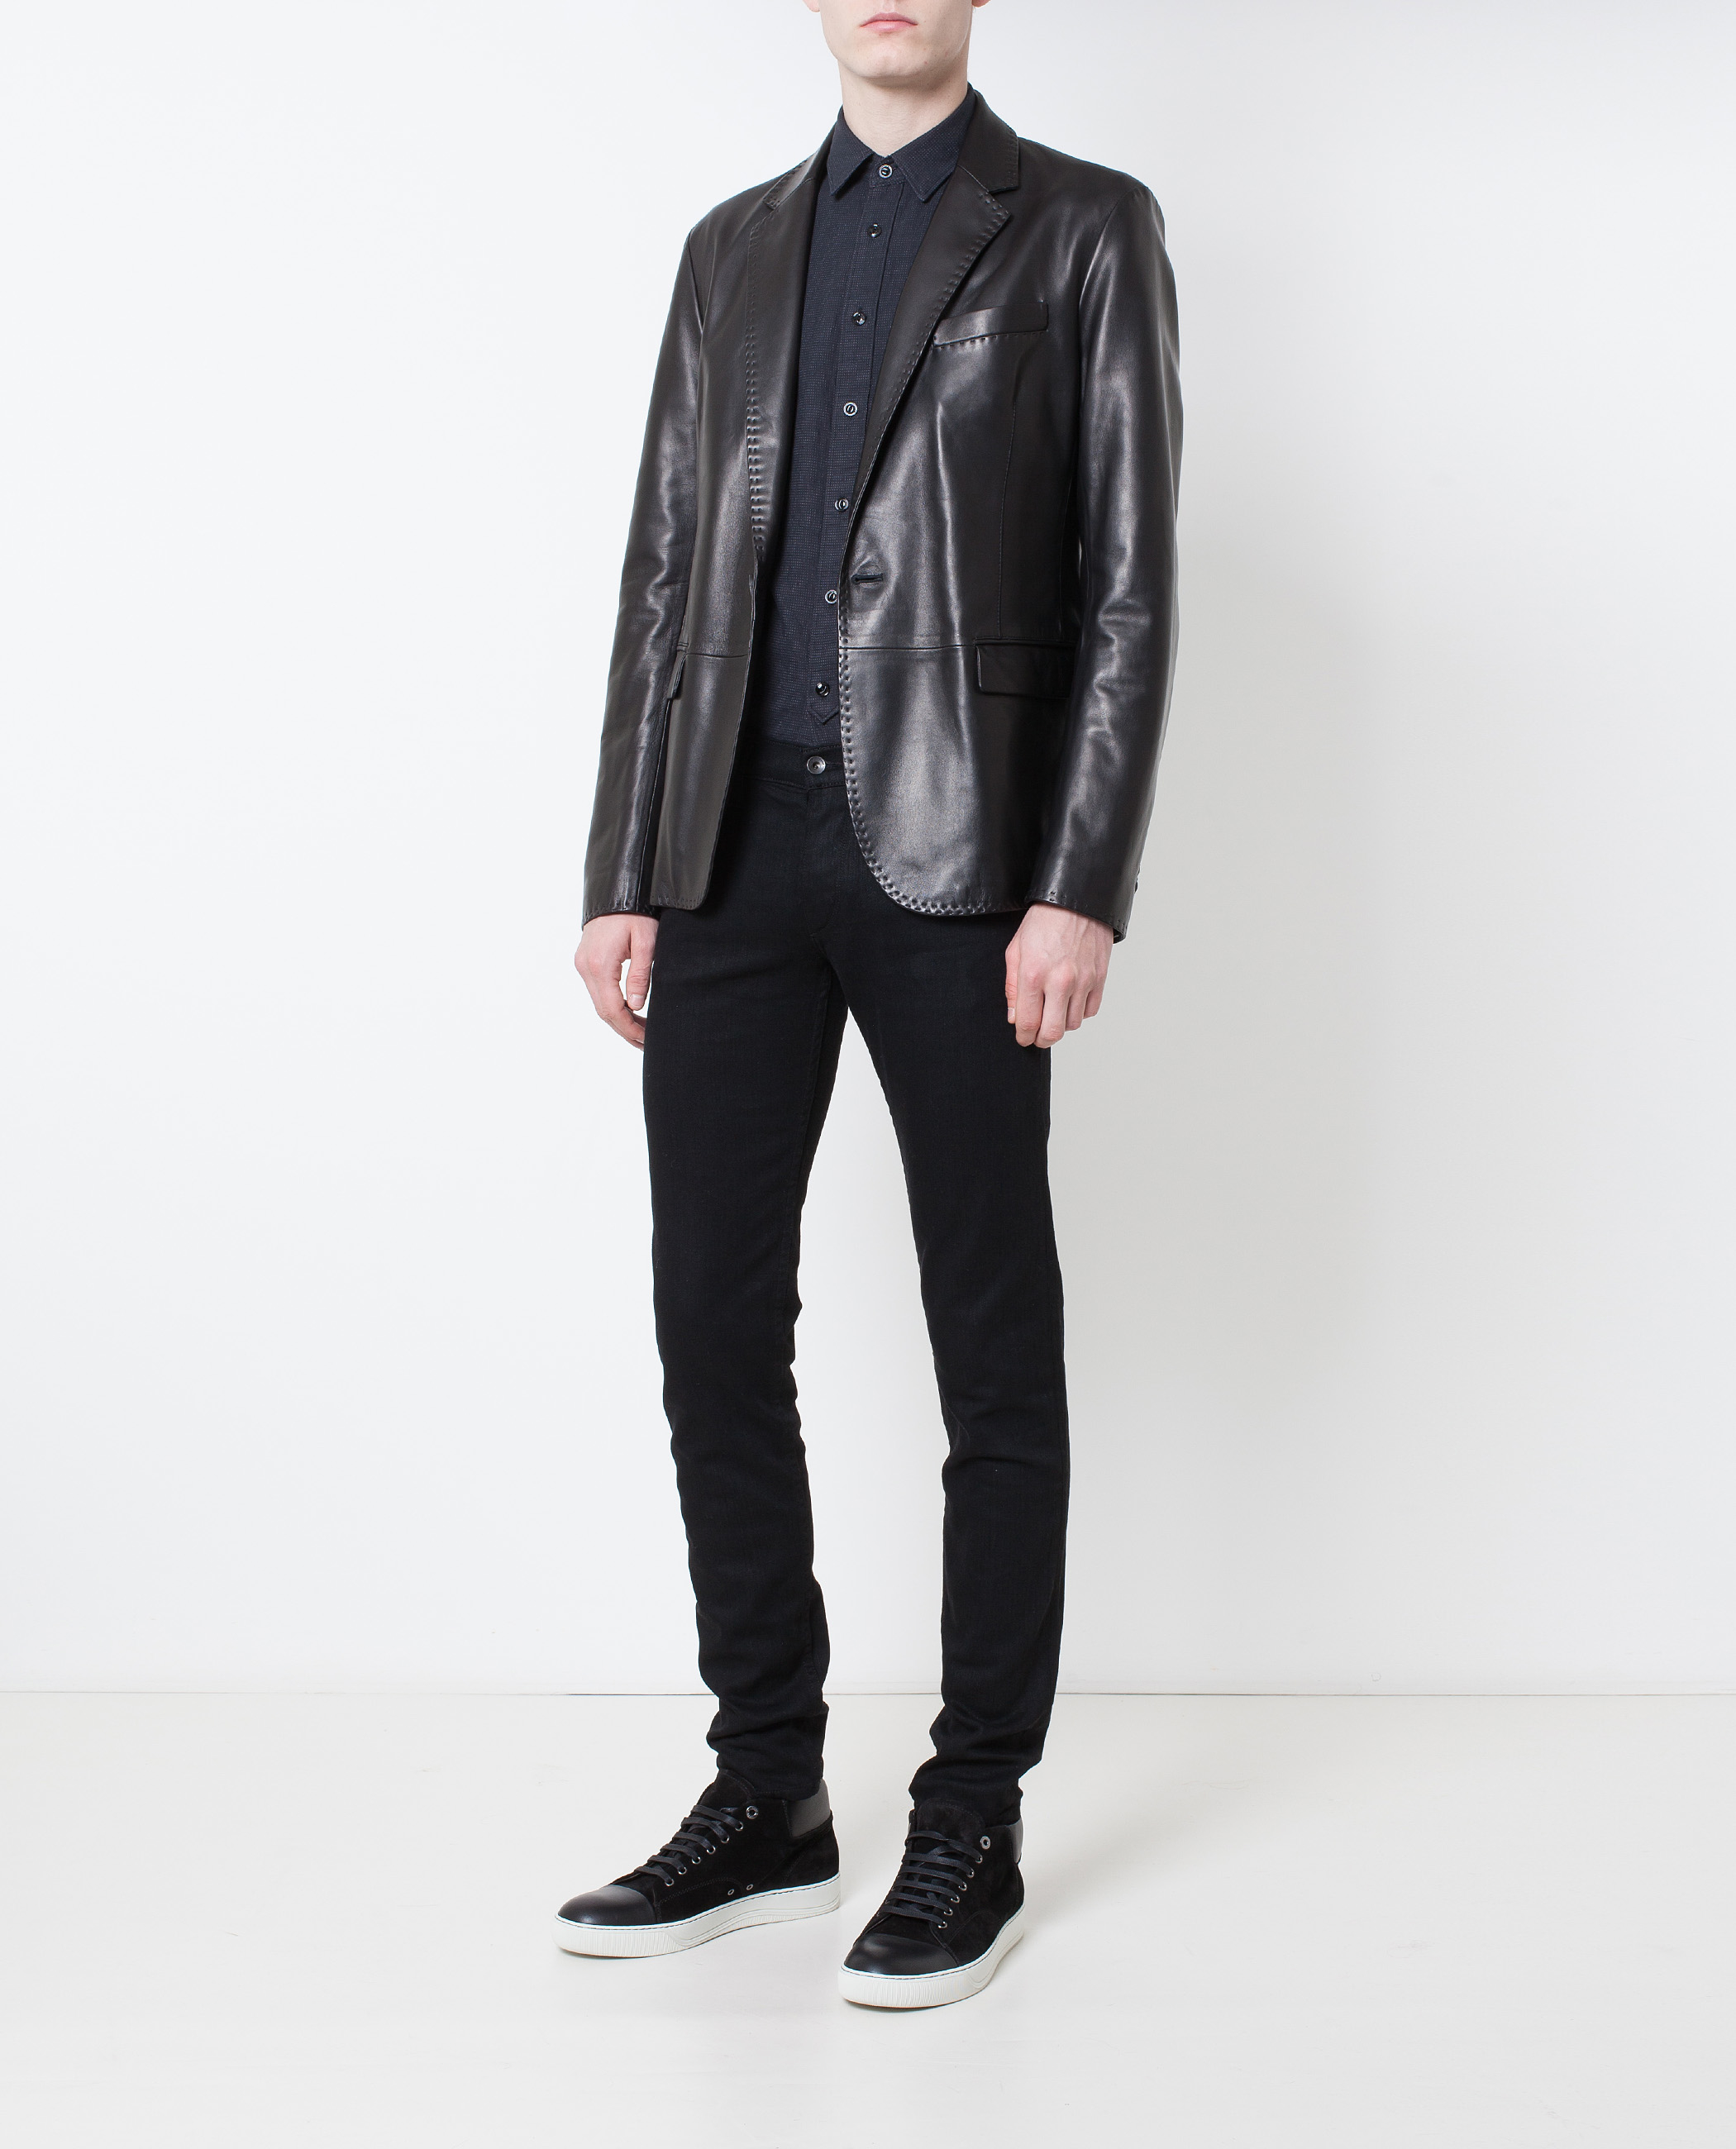 Lyst - Lanvin Tailored Leather Jacket in Black for Men